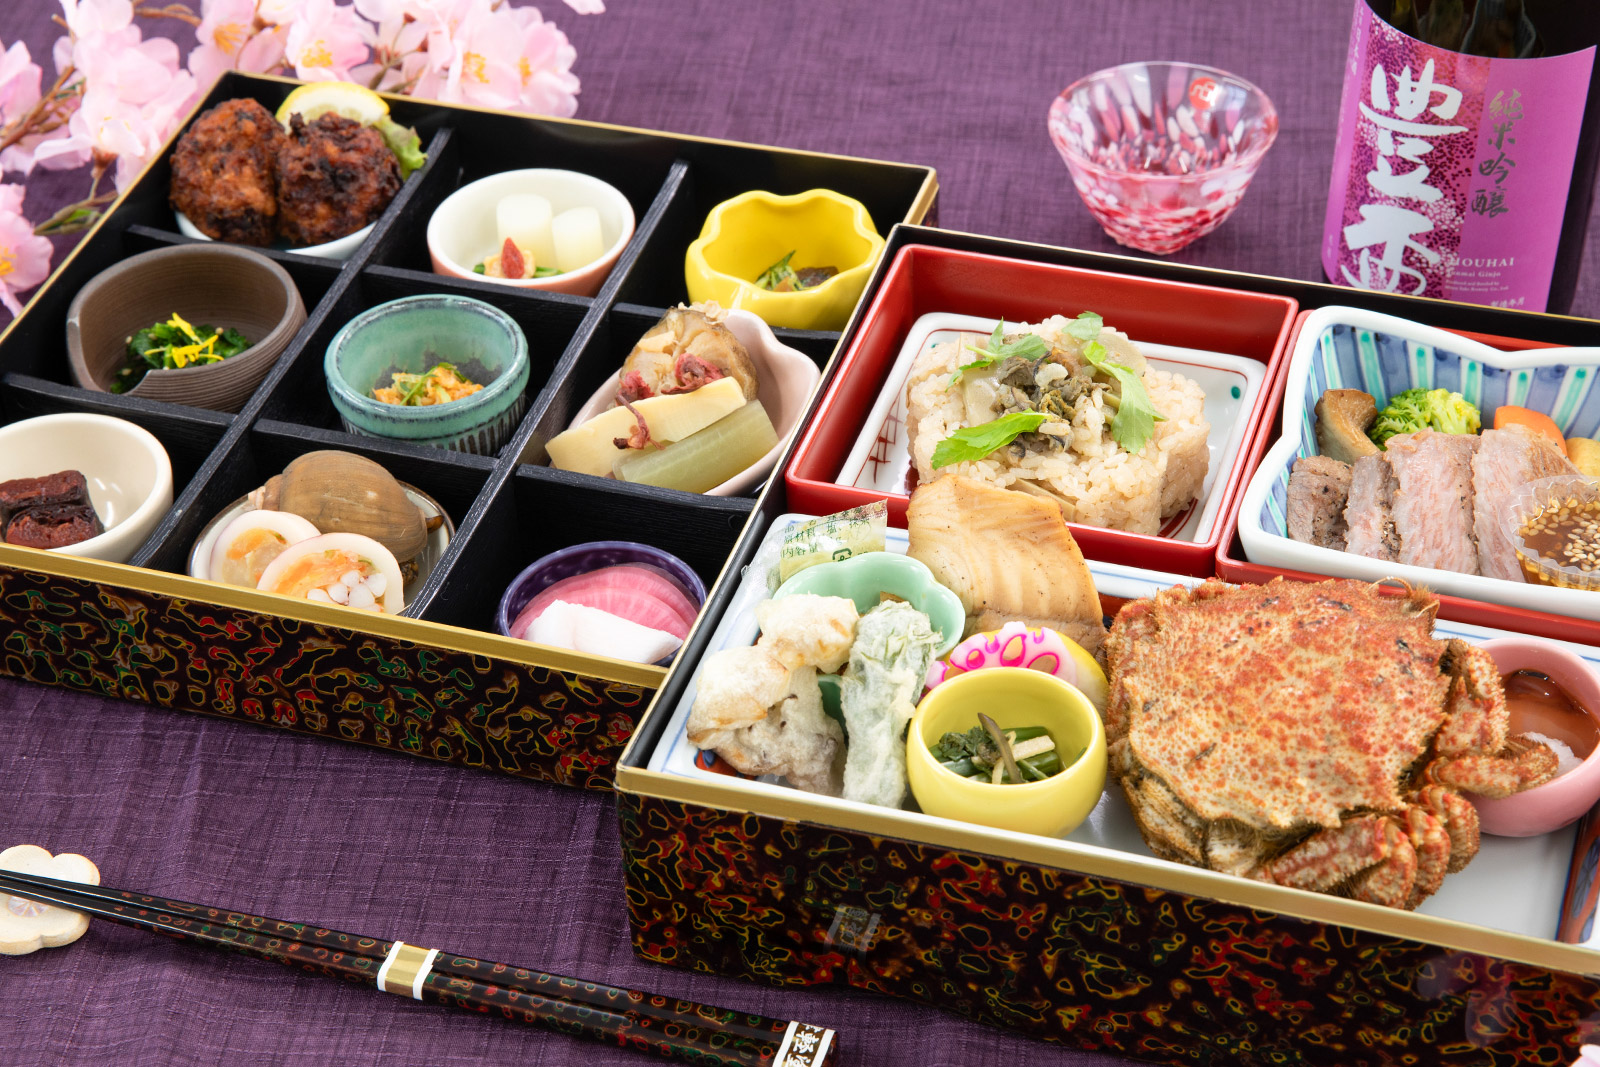 The obento (boxed lunch)